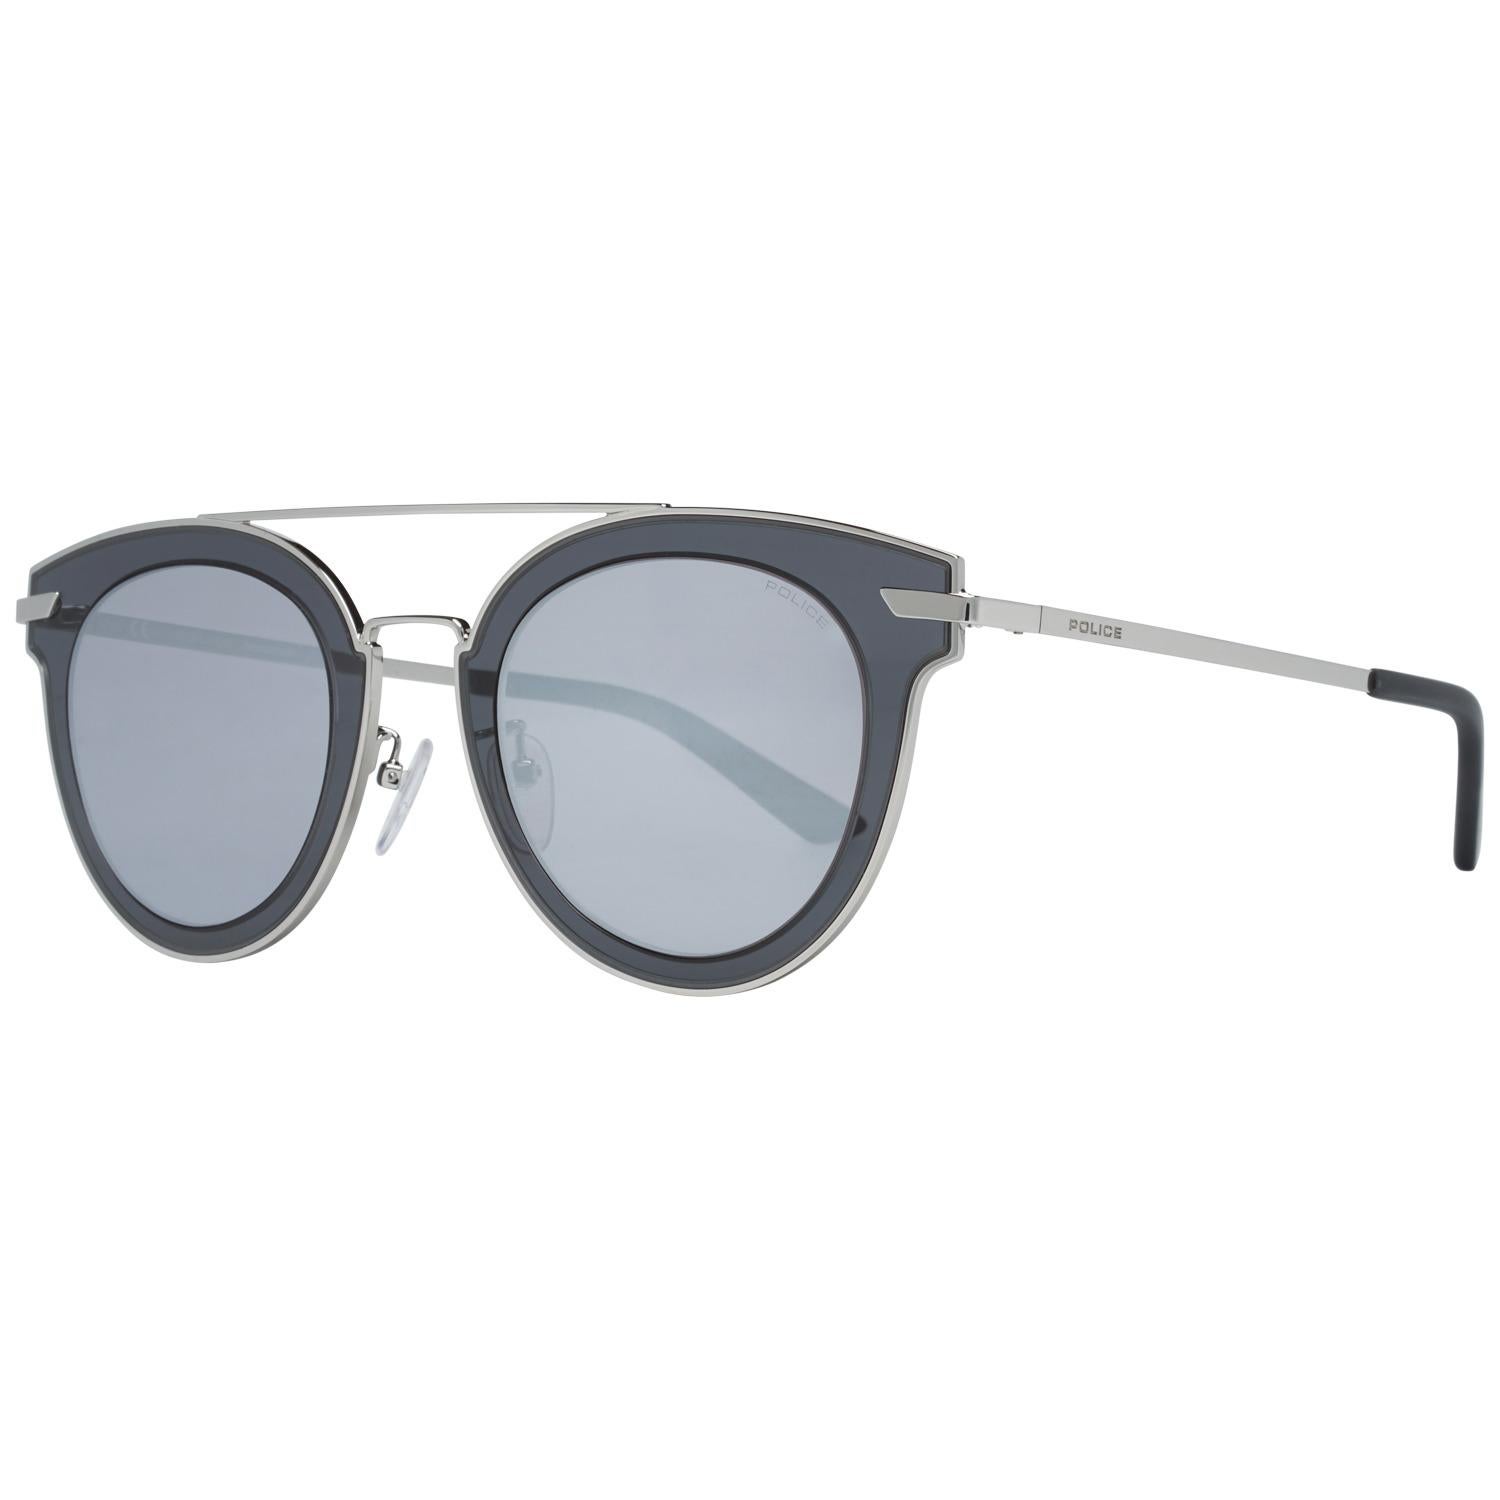 Details
MATERIAL: Metal
COLOR: Silver
MODEL: SPL543G50579K
GENDER: Adult Unisex
COUNTRY OF MANUFACTURE: Italy
TYPE: Sunglasses
ORIGINAL CASE?: Yes
STYLE: Round
OCCASION: Casual
FEATURES: Lightweight
LENS COLOR: Silver
LENS TECHNOLOGY: Mirrored
YEAR